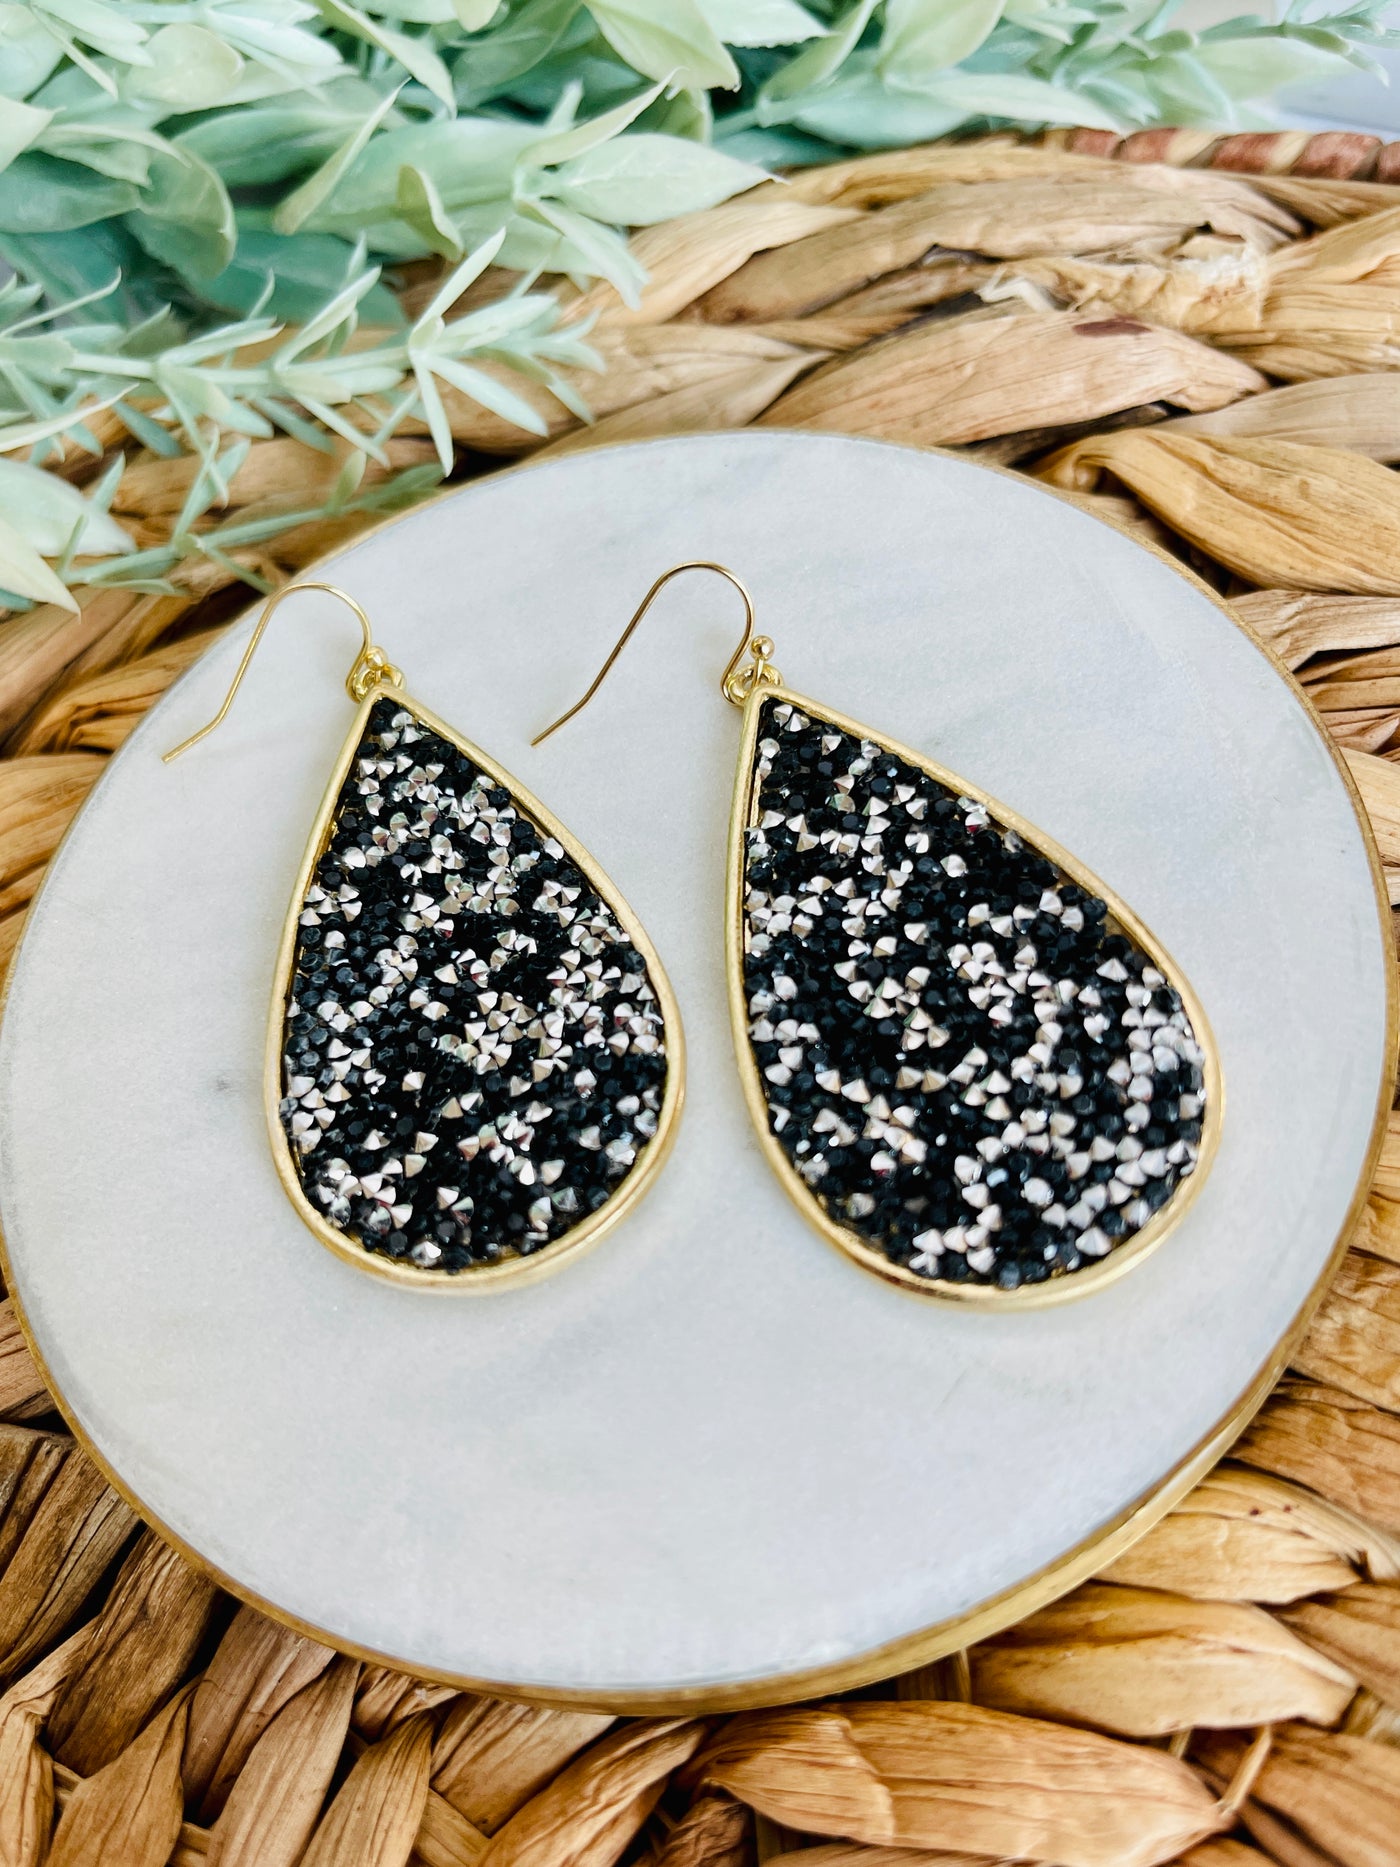 Patricia Rhinestone Teardrop Earrings-DMC-Black and Silver-Shop Anchored Bliss Women's Boutique Clothing Store